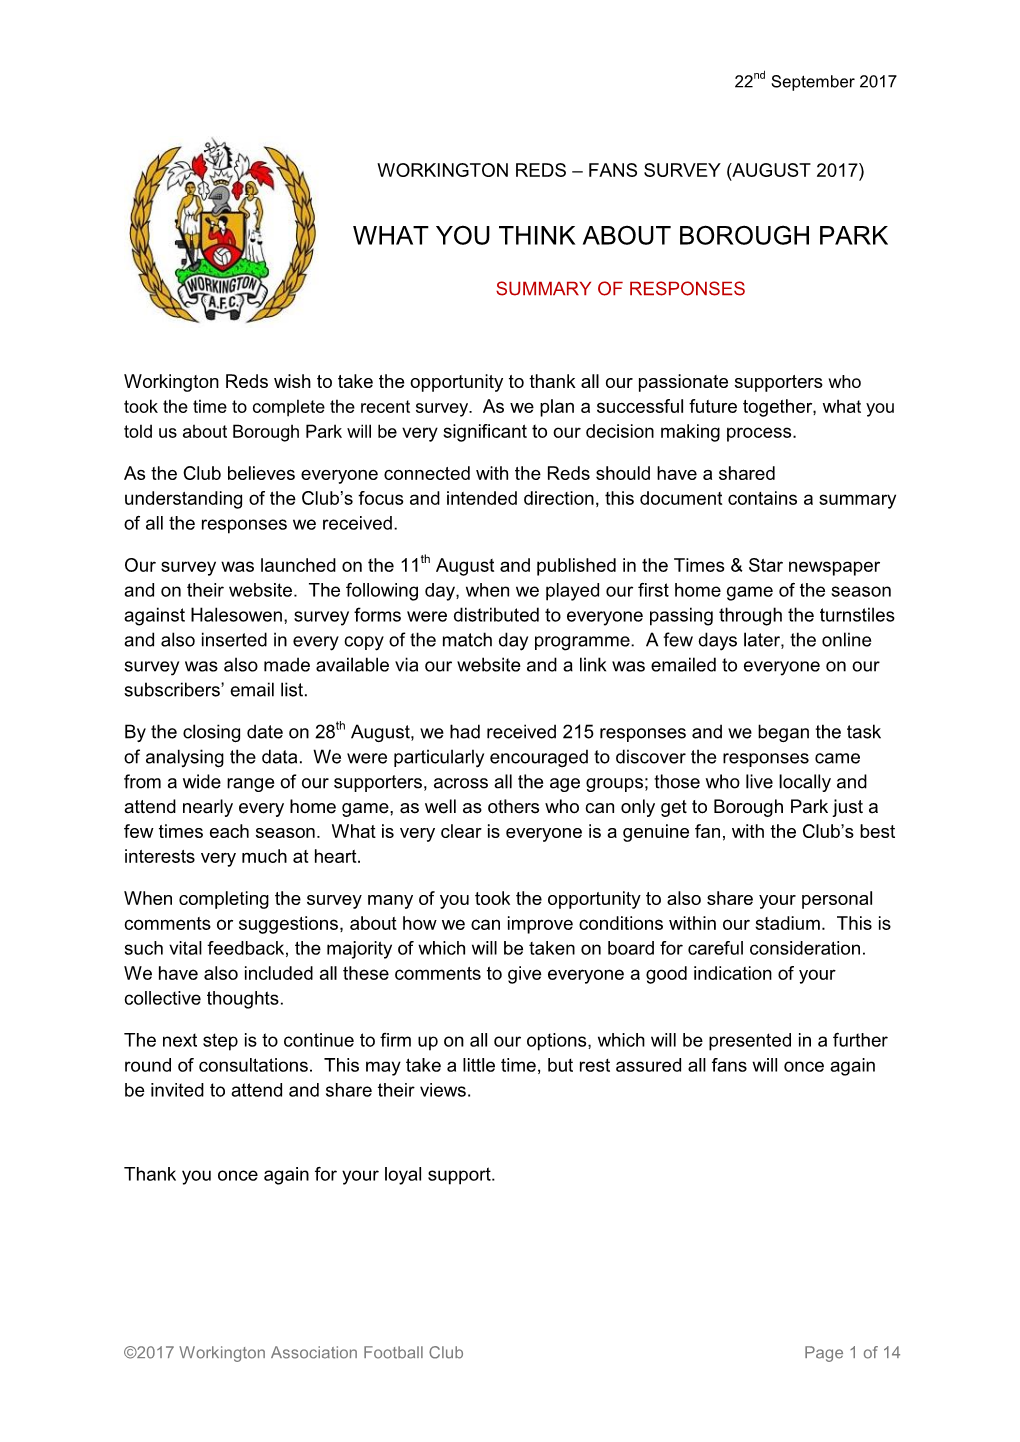 What You Think About Borough Park